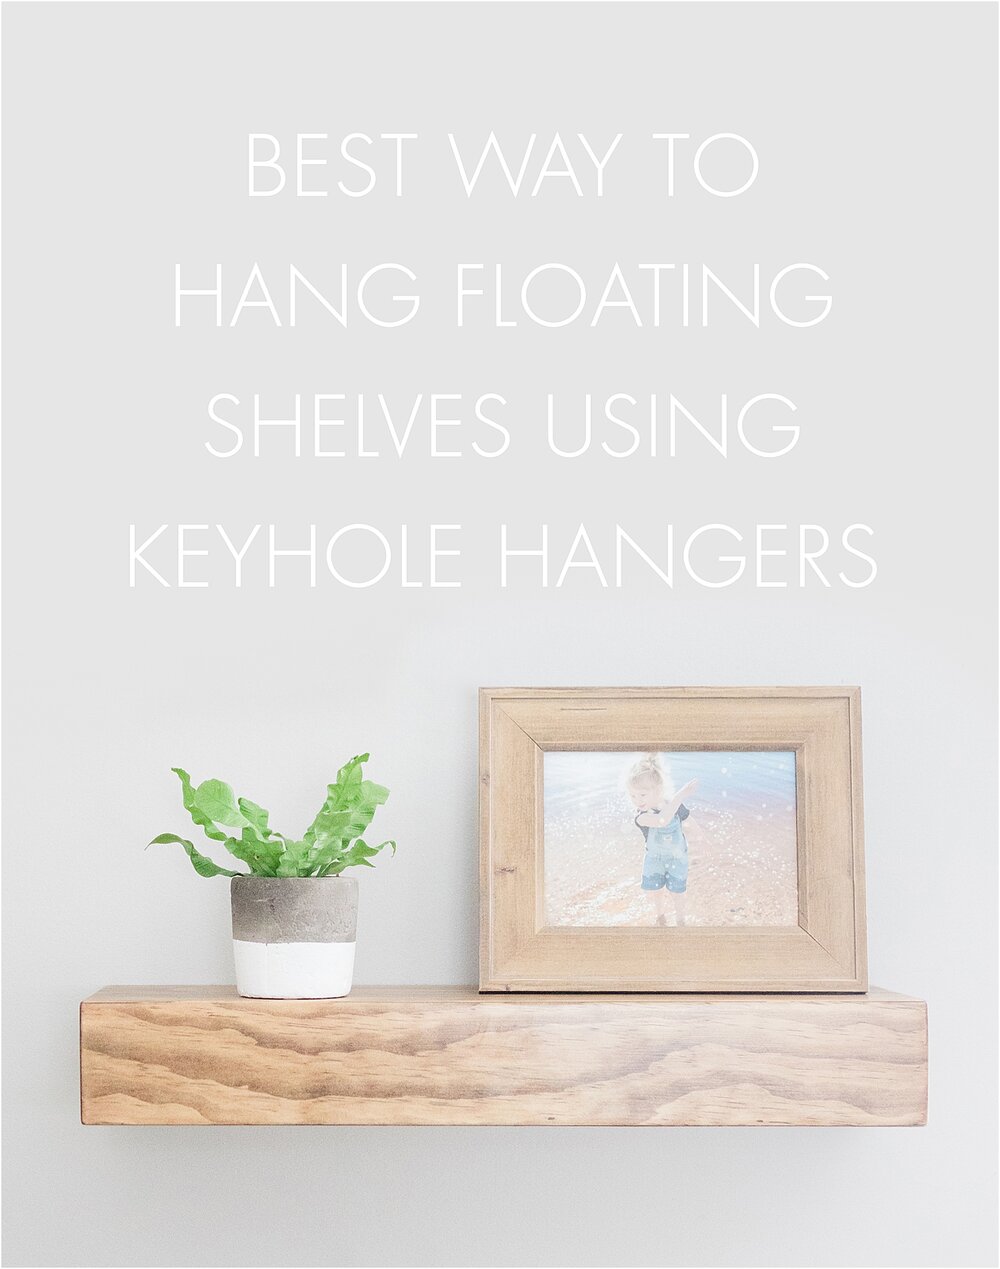 How To Hang Floating Shelves With, How To Hang Shelves